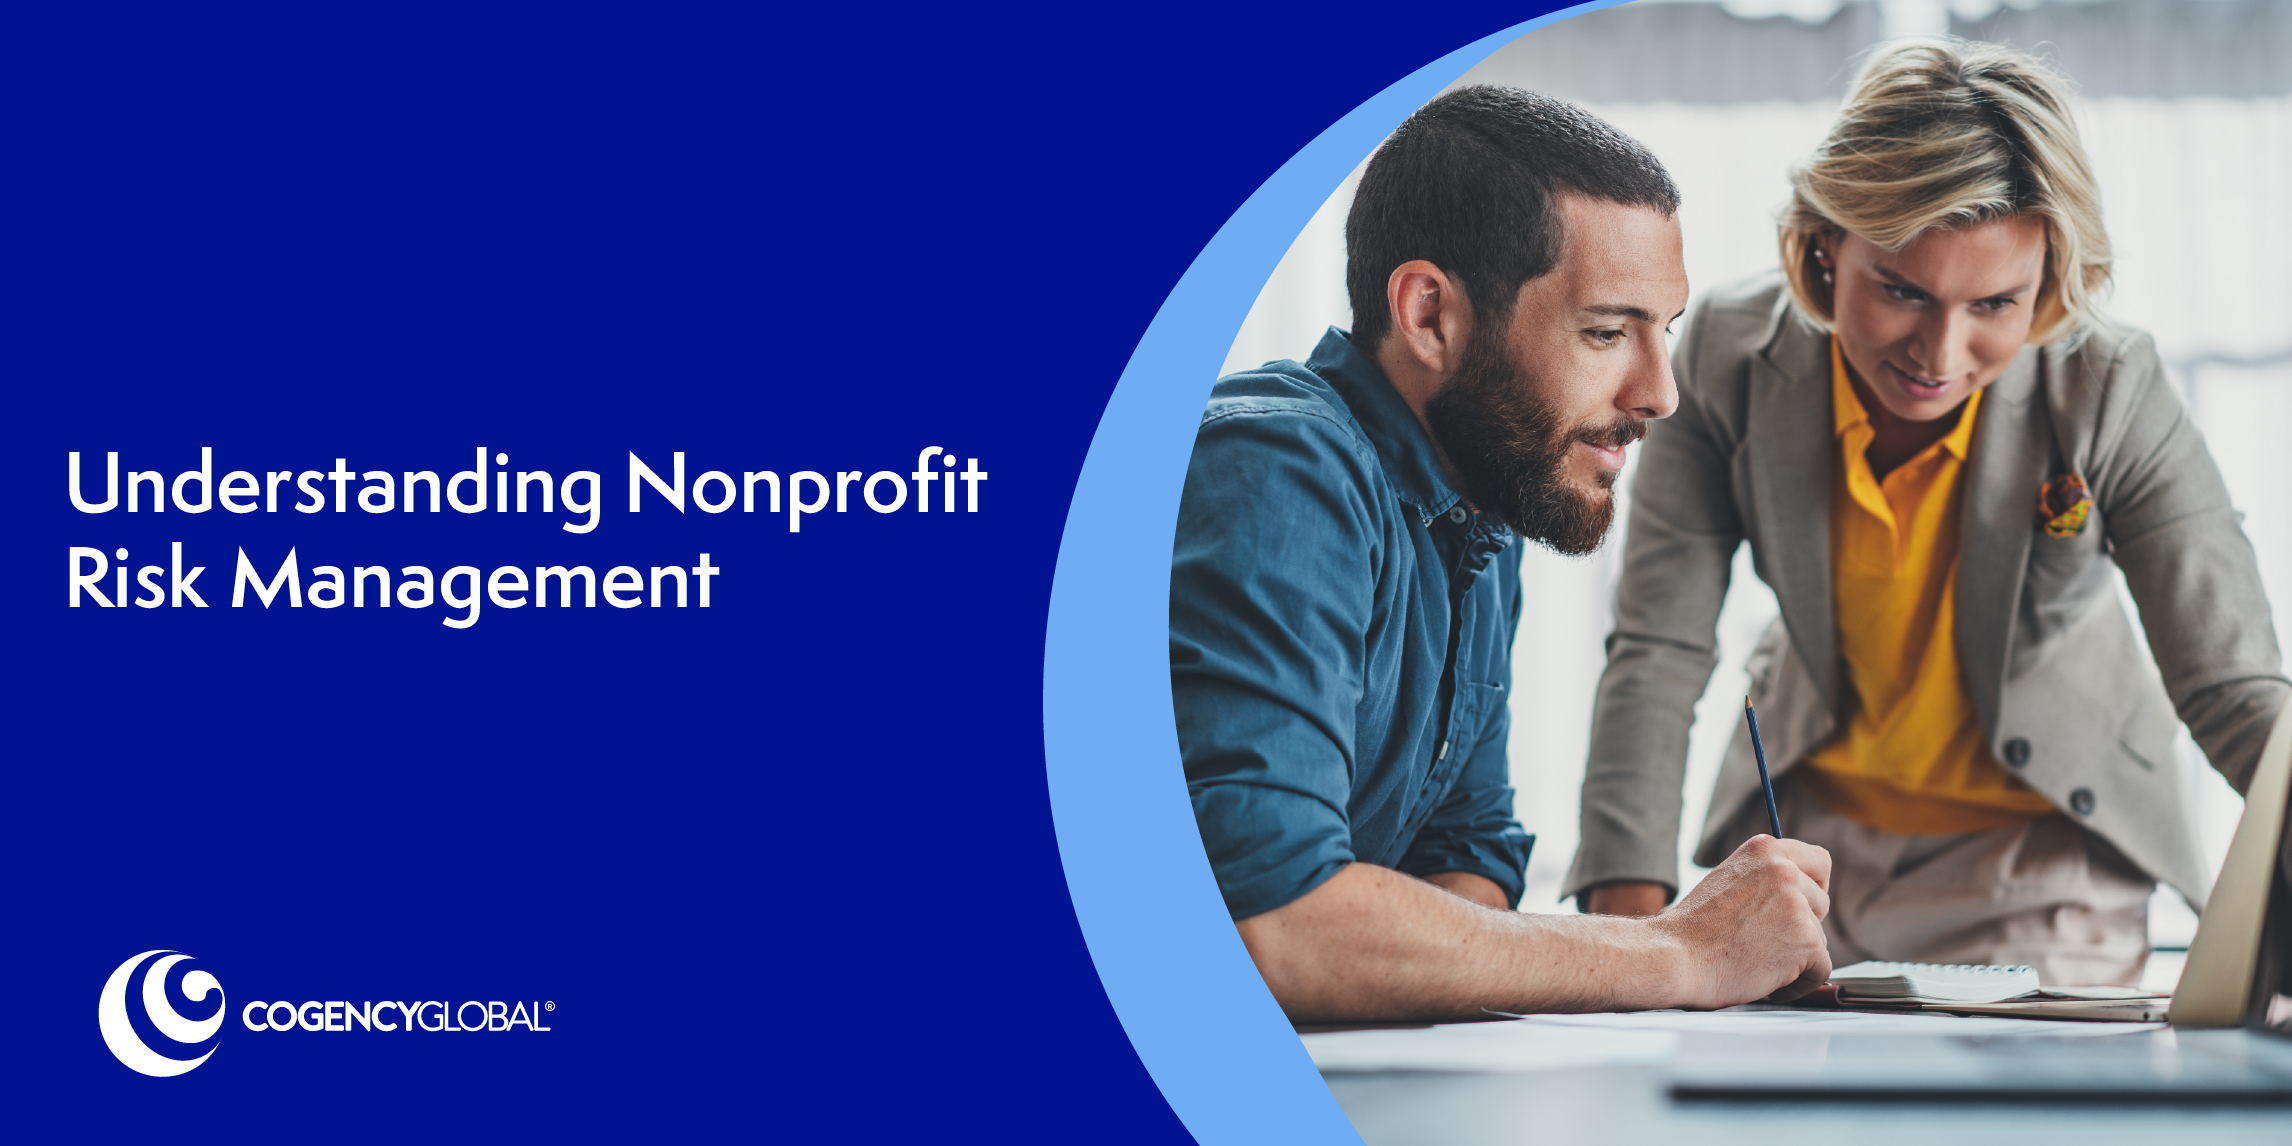 Understanding Nonprofit Risk Management: 3 Things to Know